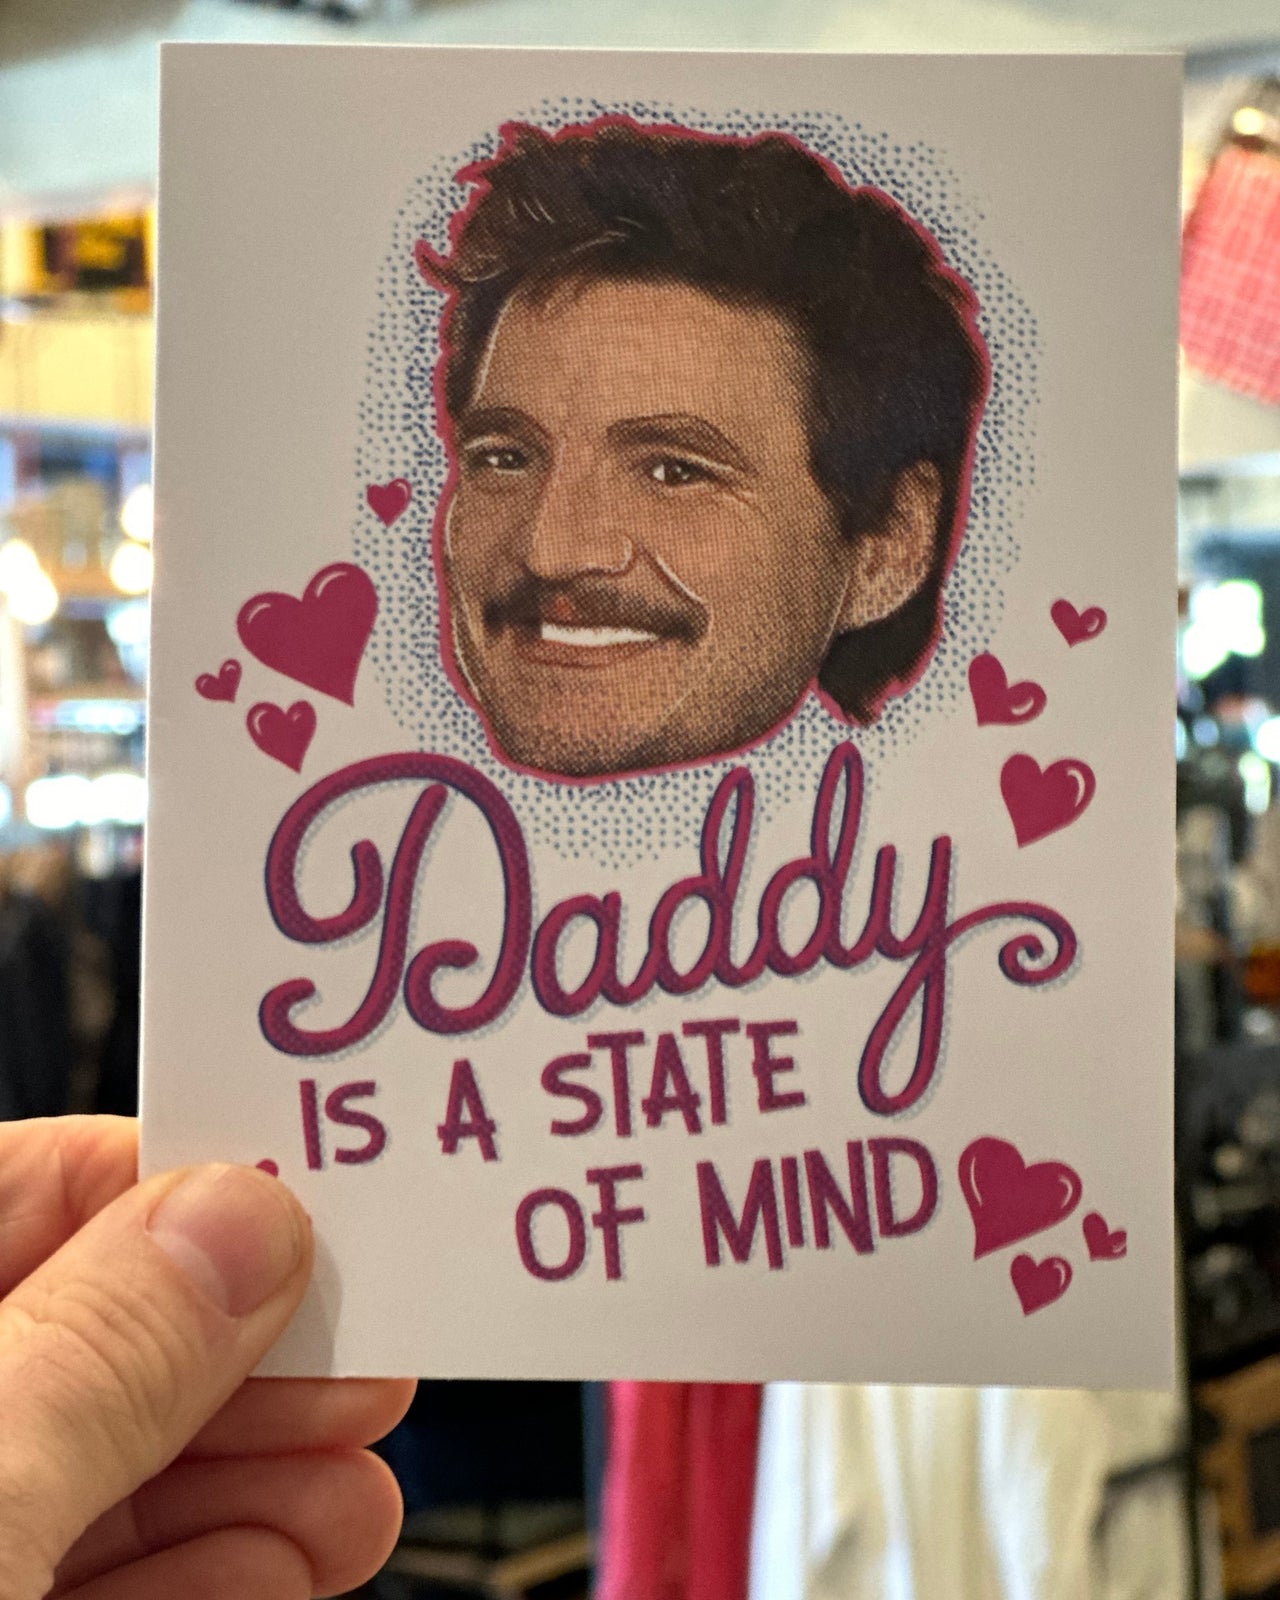 Pedro Daddy State of Mind Card